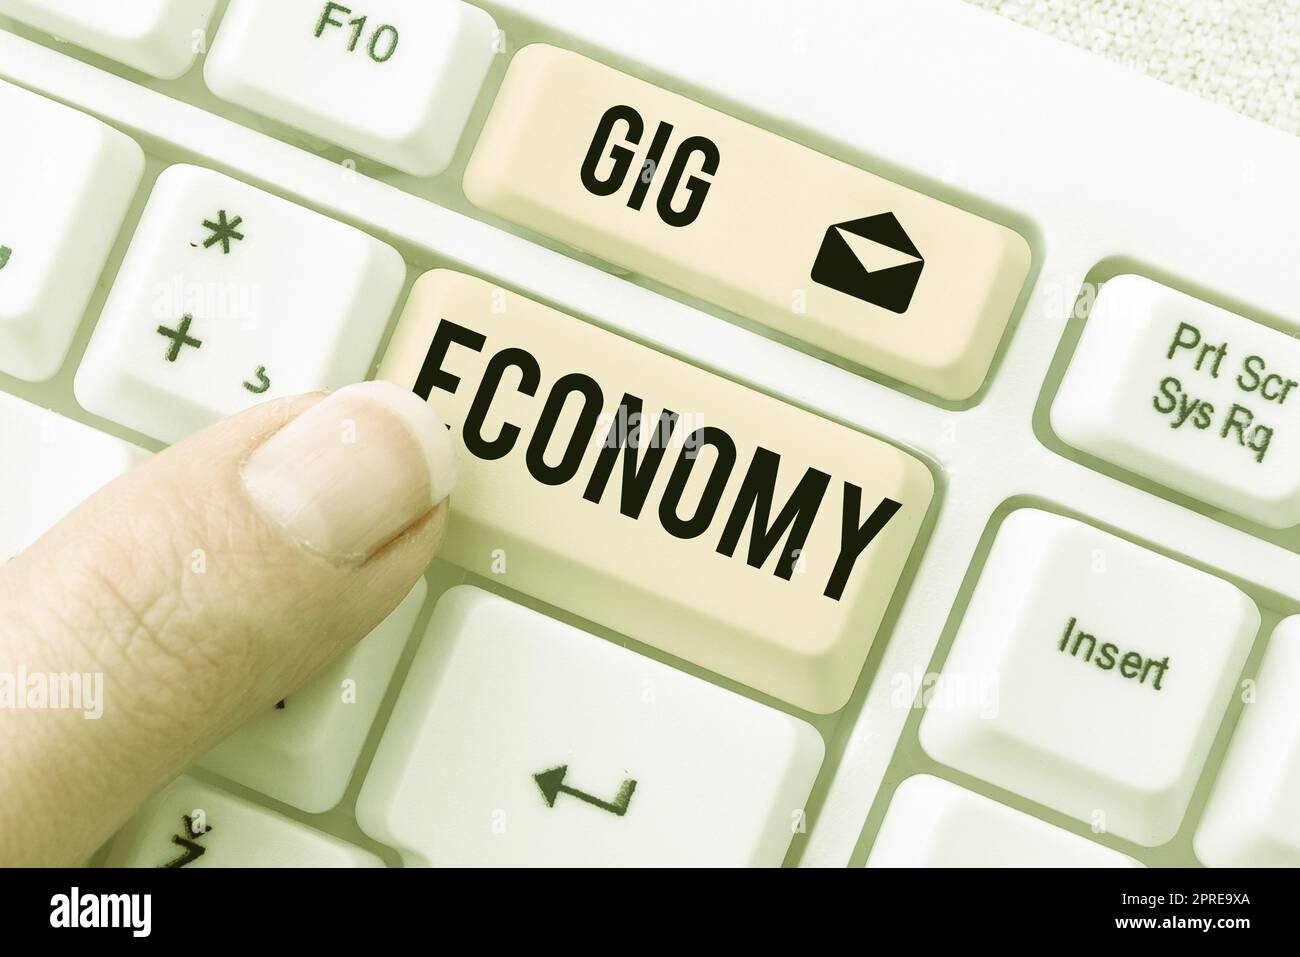 Writing displaying text Gig Economy, Business overview a market system distinguished by shortterm jobs and contracts Stock Photo